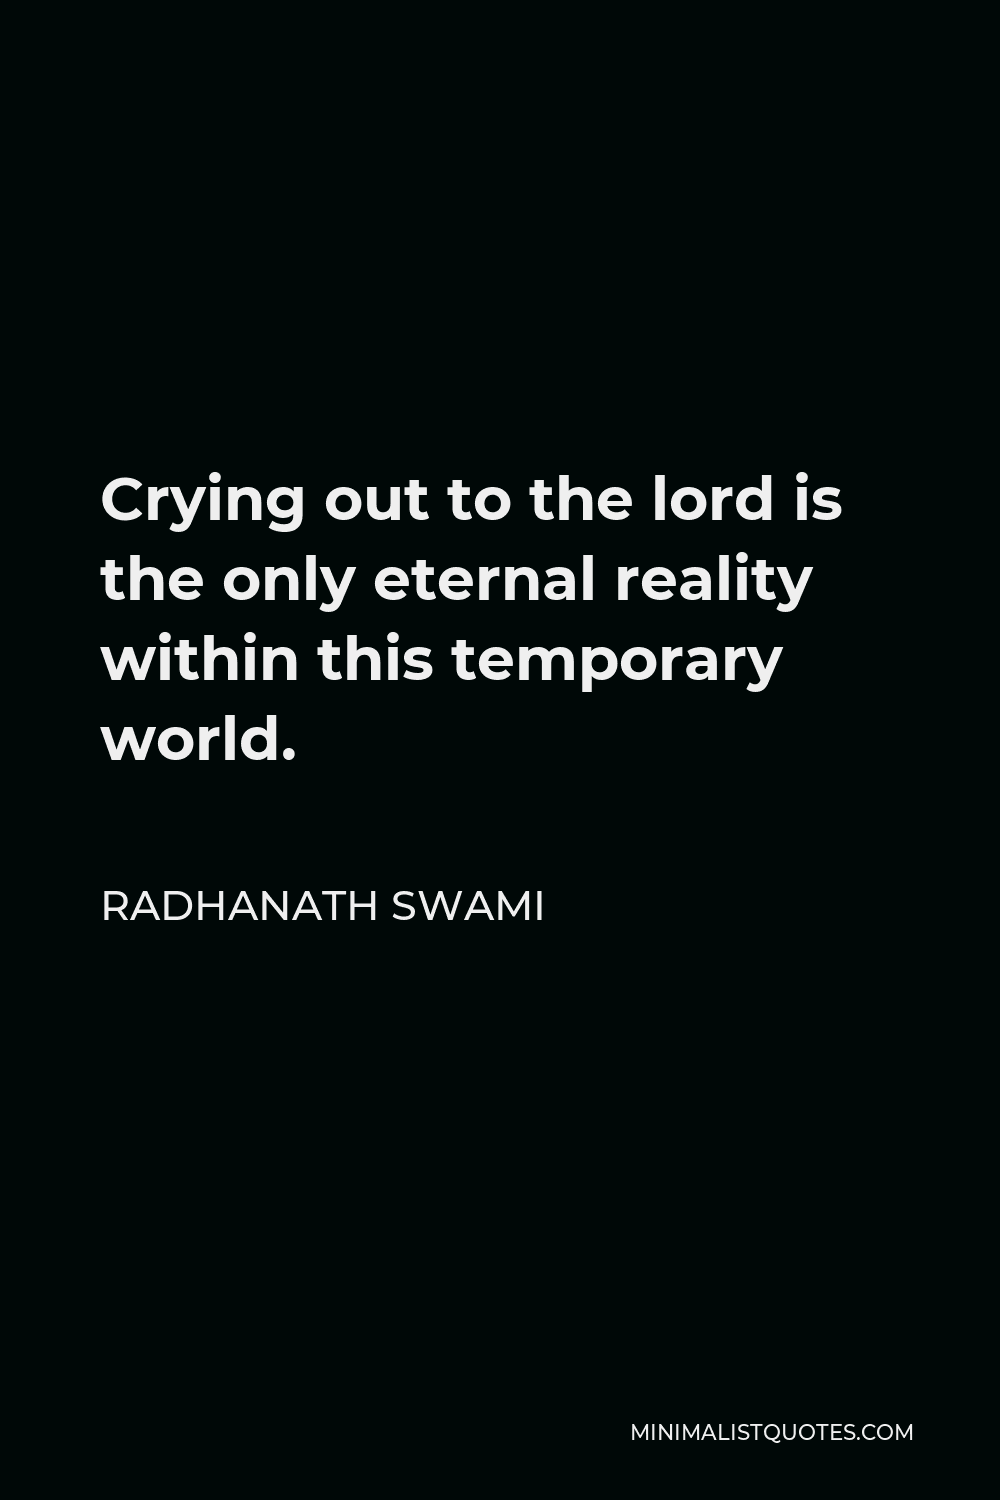 Radhanath Swami Quote - Crying out to the lord is the only eternal reality within this temporary world.